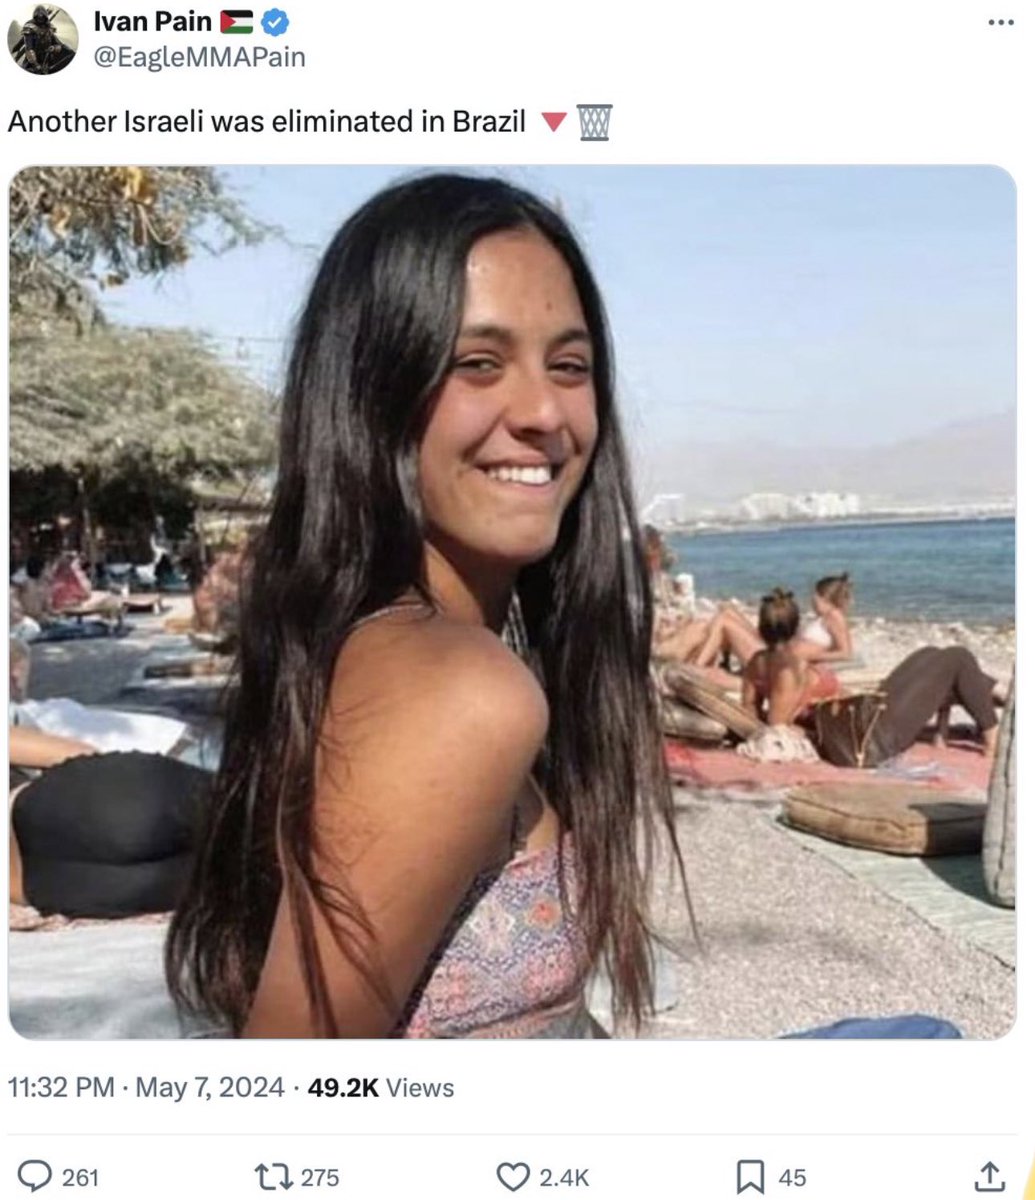 Many are celebrating the death of this young woman who was tragically killed during a burglary in Brazil. Why? Because she had the audacity to be Israeli. I swear there's some kind of term for when you want a person dead based solely on their nationality/ethnicity, but for the…